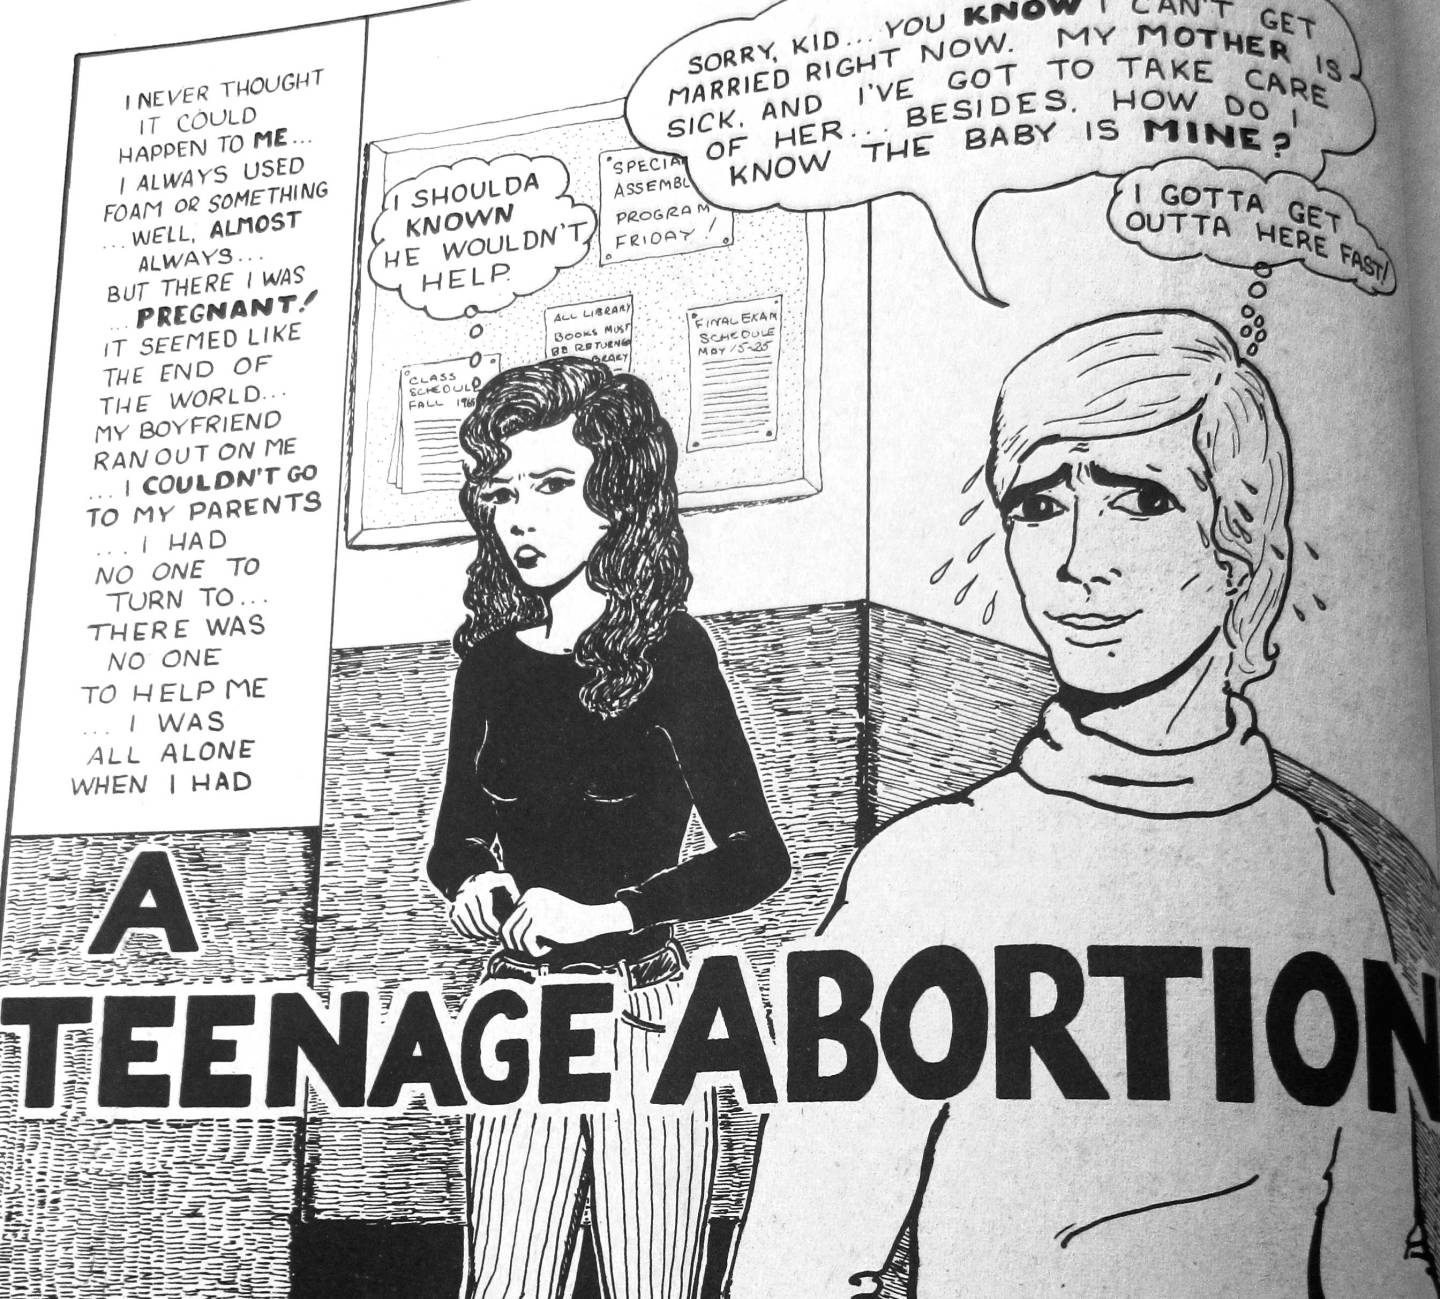 A full page illustration of a worried girl and a man standing nearby. It's titled "A Teenage Abortion."